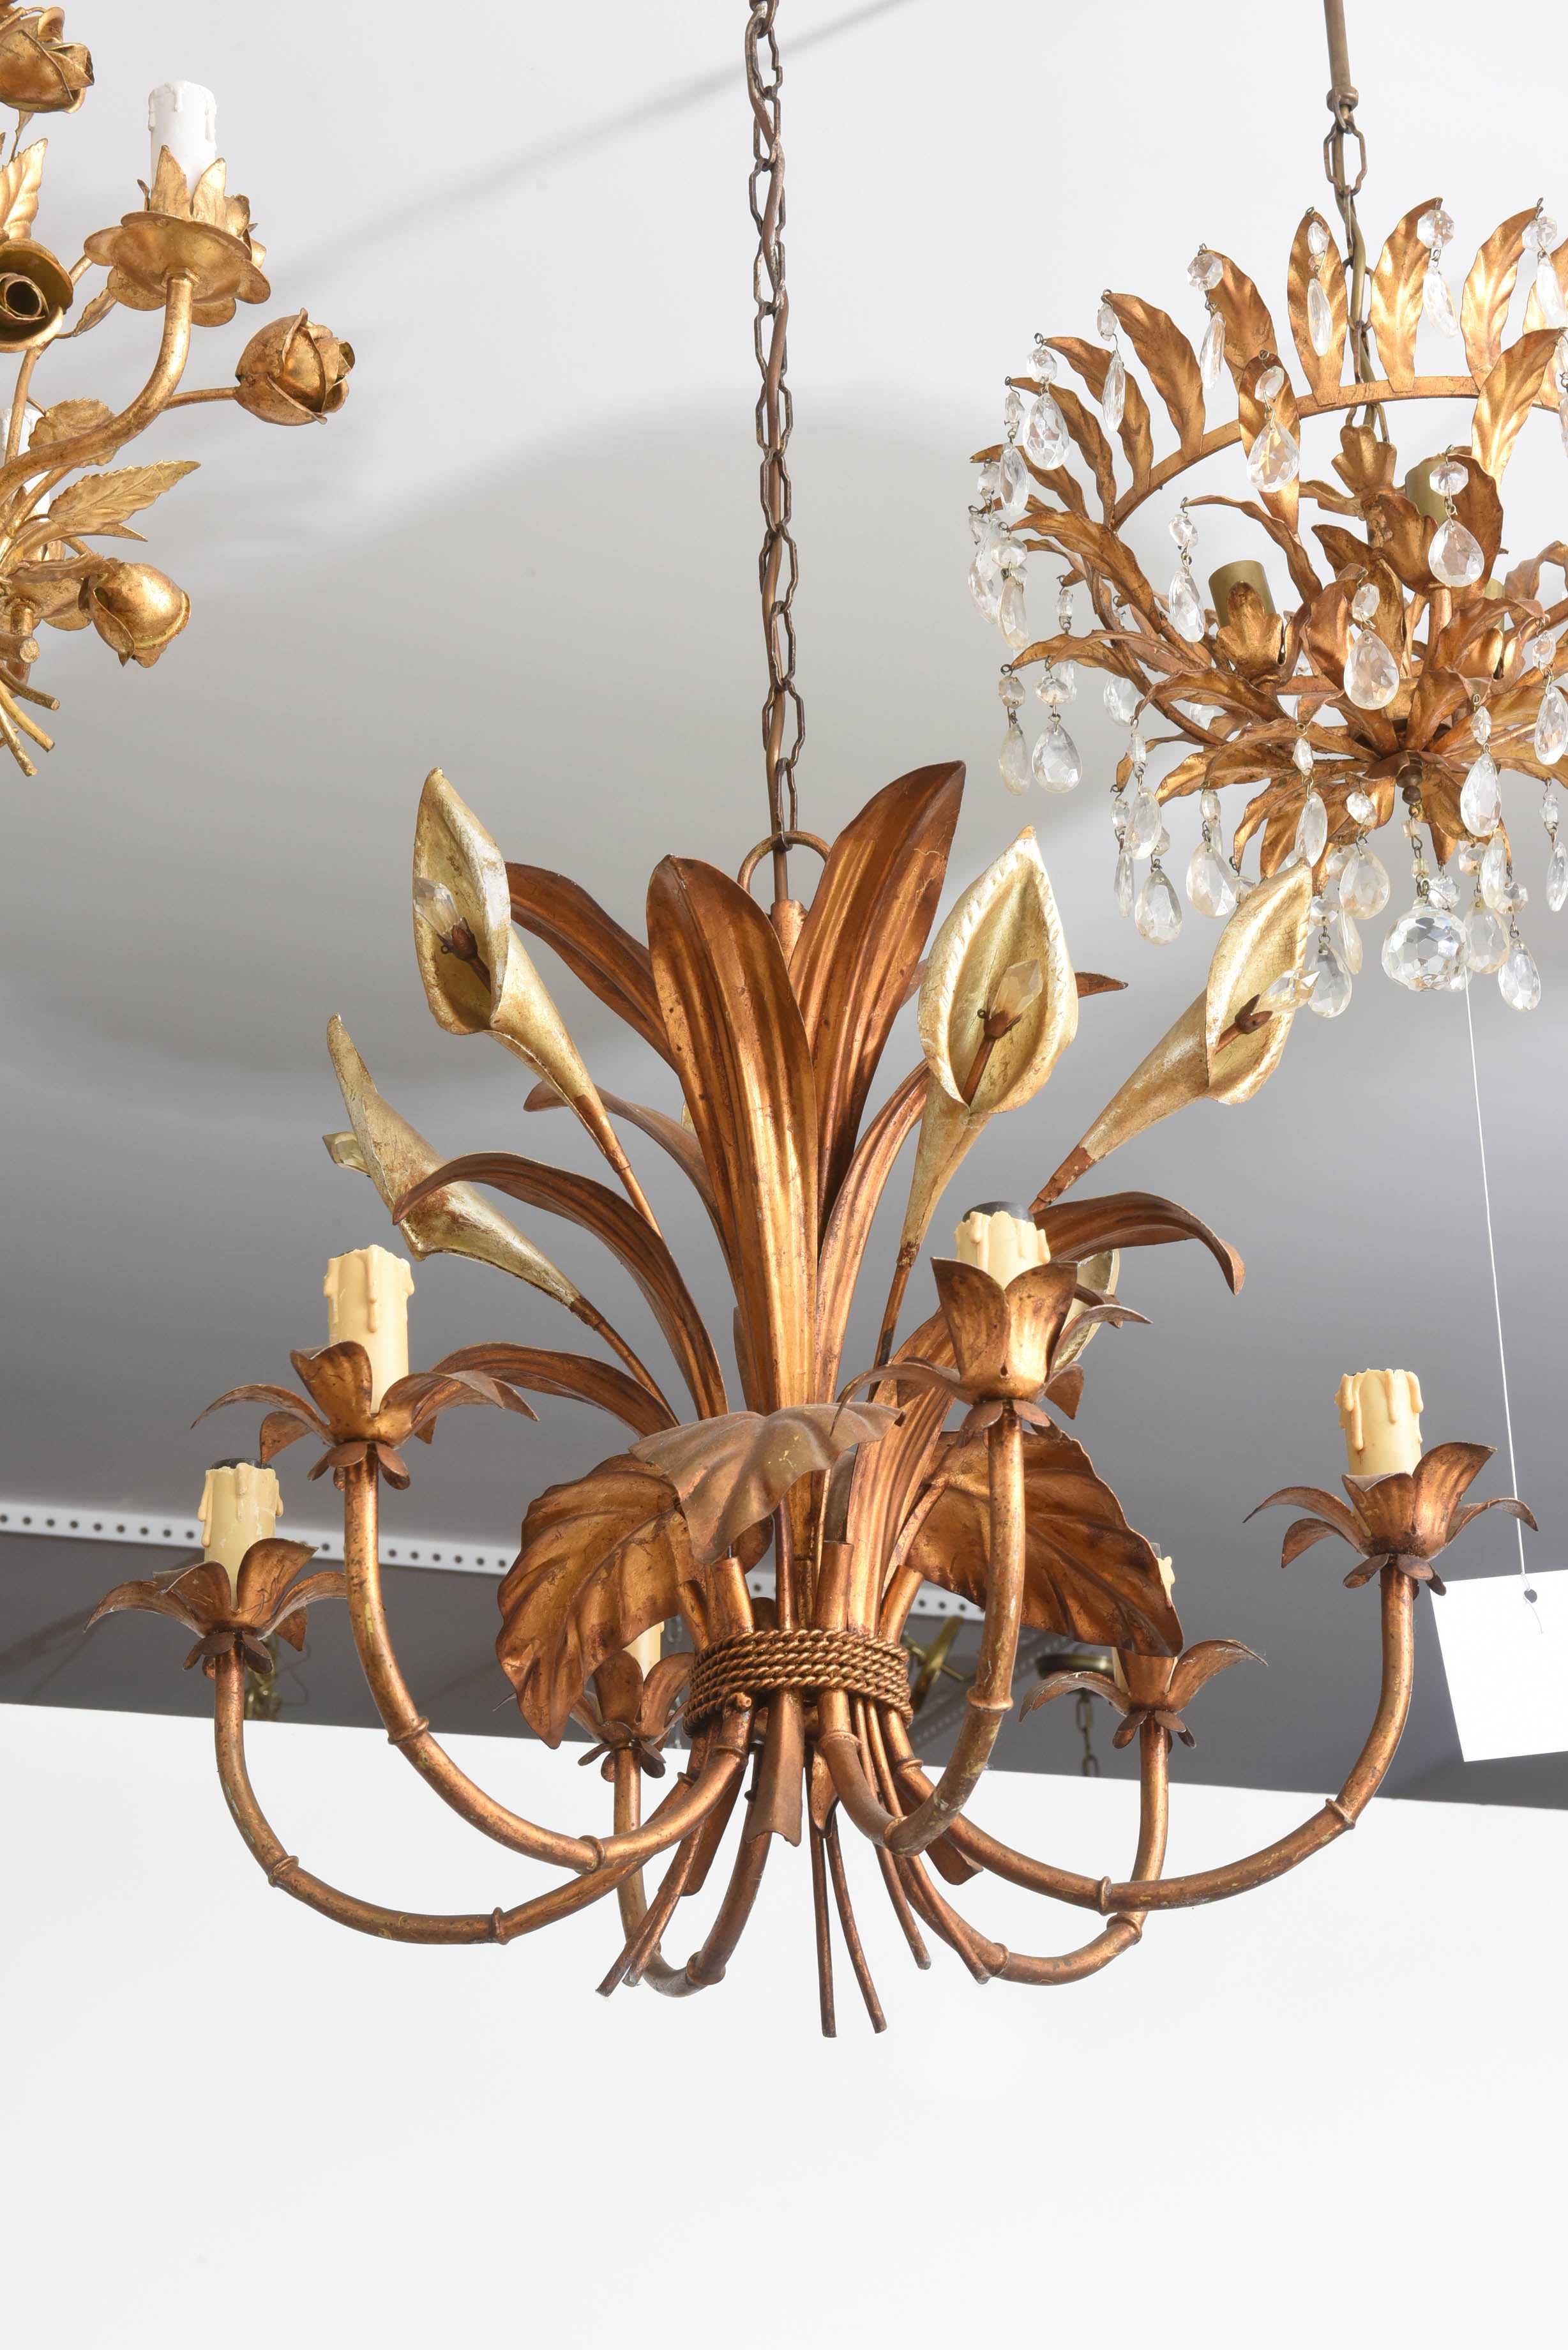 This gilt-metal six-light, faux-bamboo chandelier epitomizes the Hollywood-Regency Style.  With its Calla Lily blooms with their cut-crystal stamens and the faux-bamboo arms this piece has a graceful, glamorous and elegant presence.

The main body